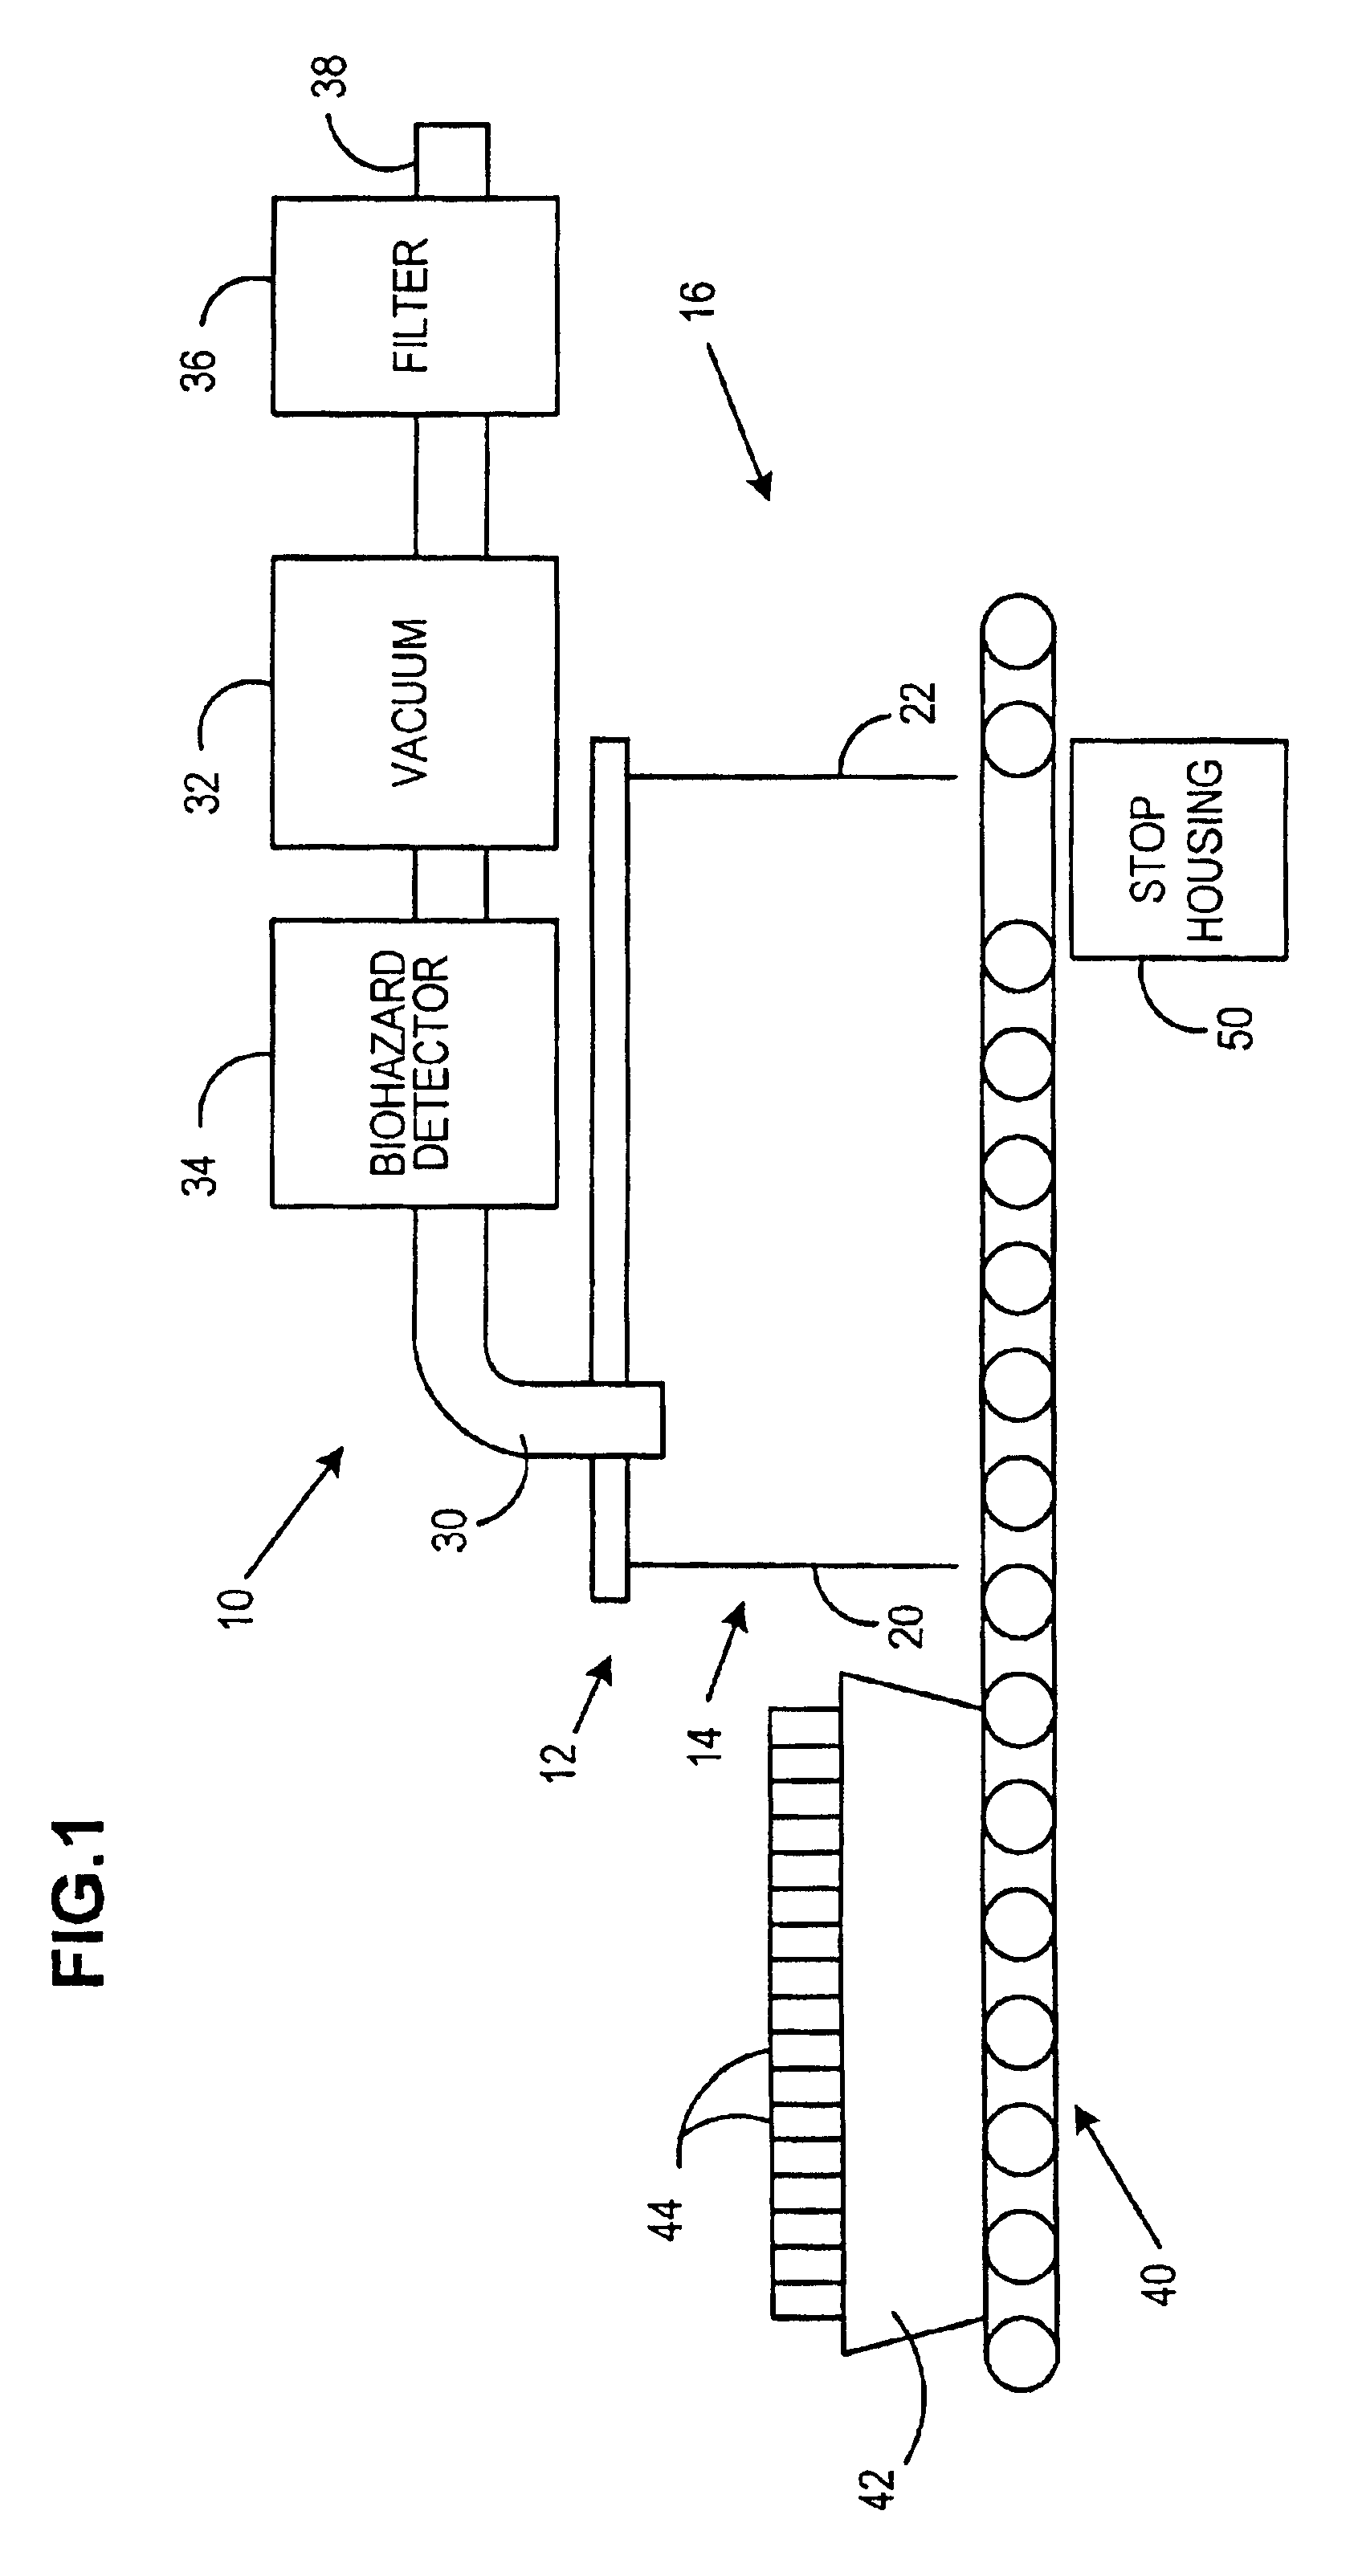 Method and system for detection of contaminants in mail